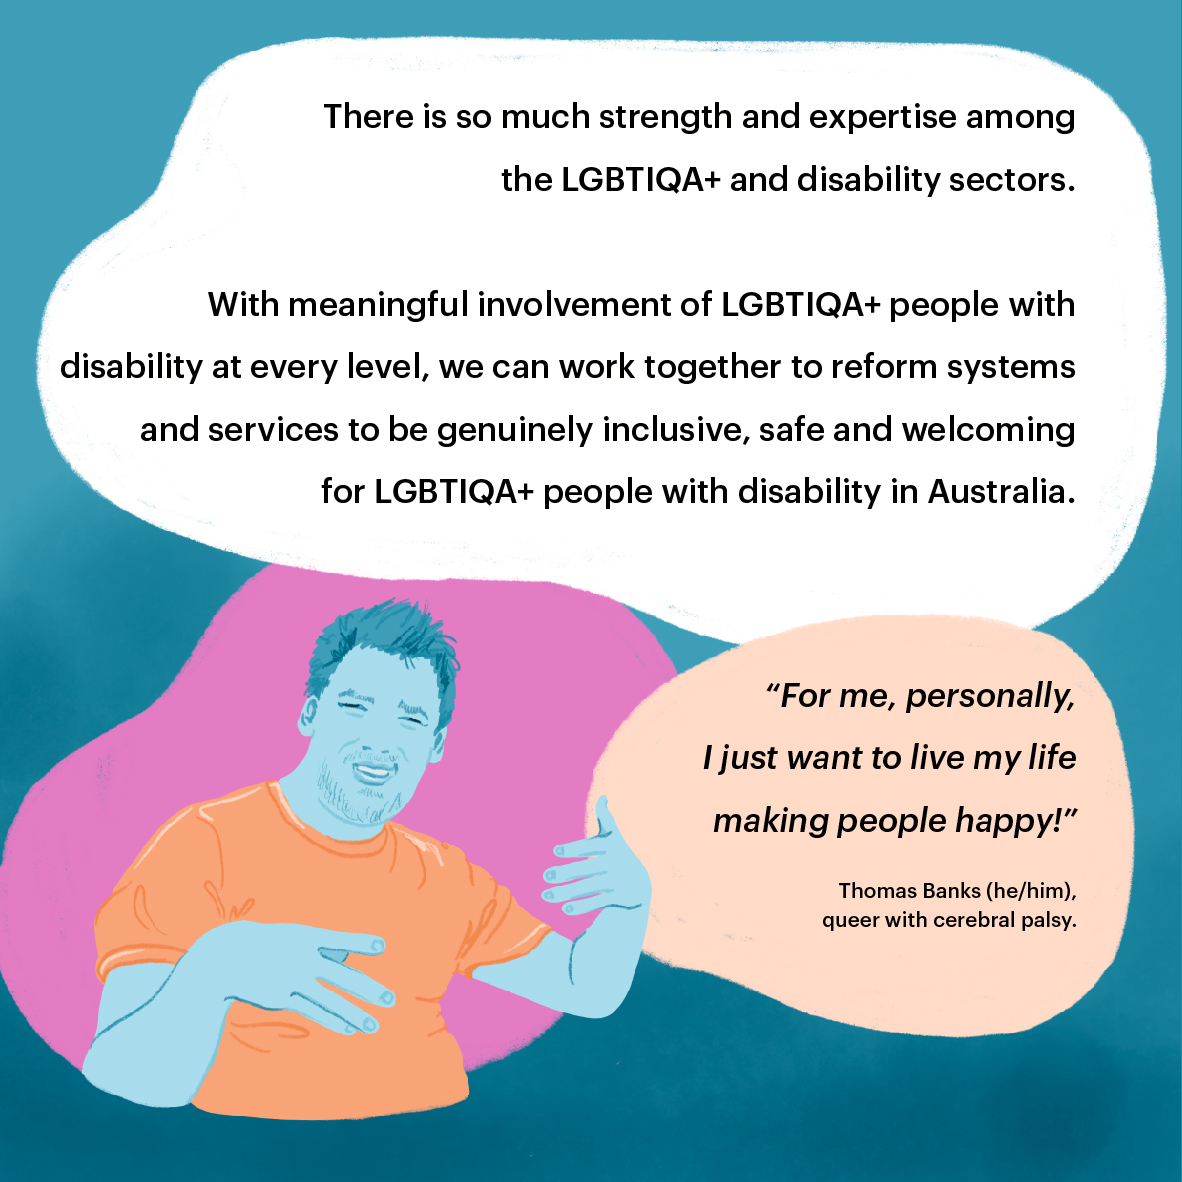 Portrait of Thomas, queer man with cerebral palsy. Text reads: There is so much strength
and expertise among the LGBTIQA+ and disability sectors. With meaningful involvement of LGBTIQA+ people with disability at every level, we can work together to reform systems and services to be genuinely inclusive, safe and welcoming for LGBTIQA+ people with disability in Australia. Quote from Thomas
reads: “For me, personally, I just want to live my life making people happy!” Thomas Banks (he/him), queer with Cerebral Palsy. 